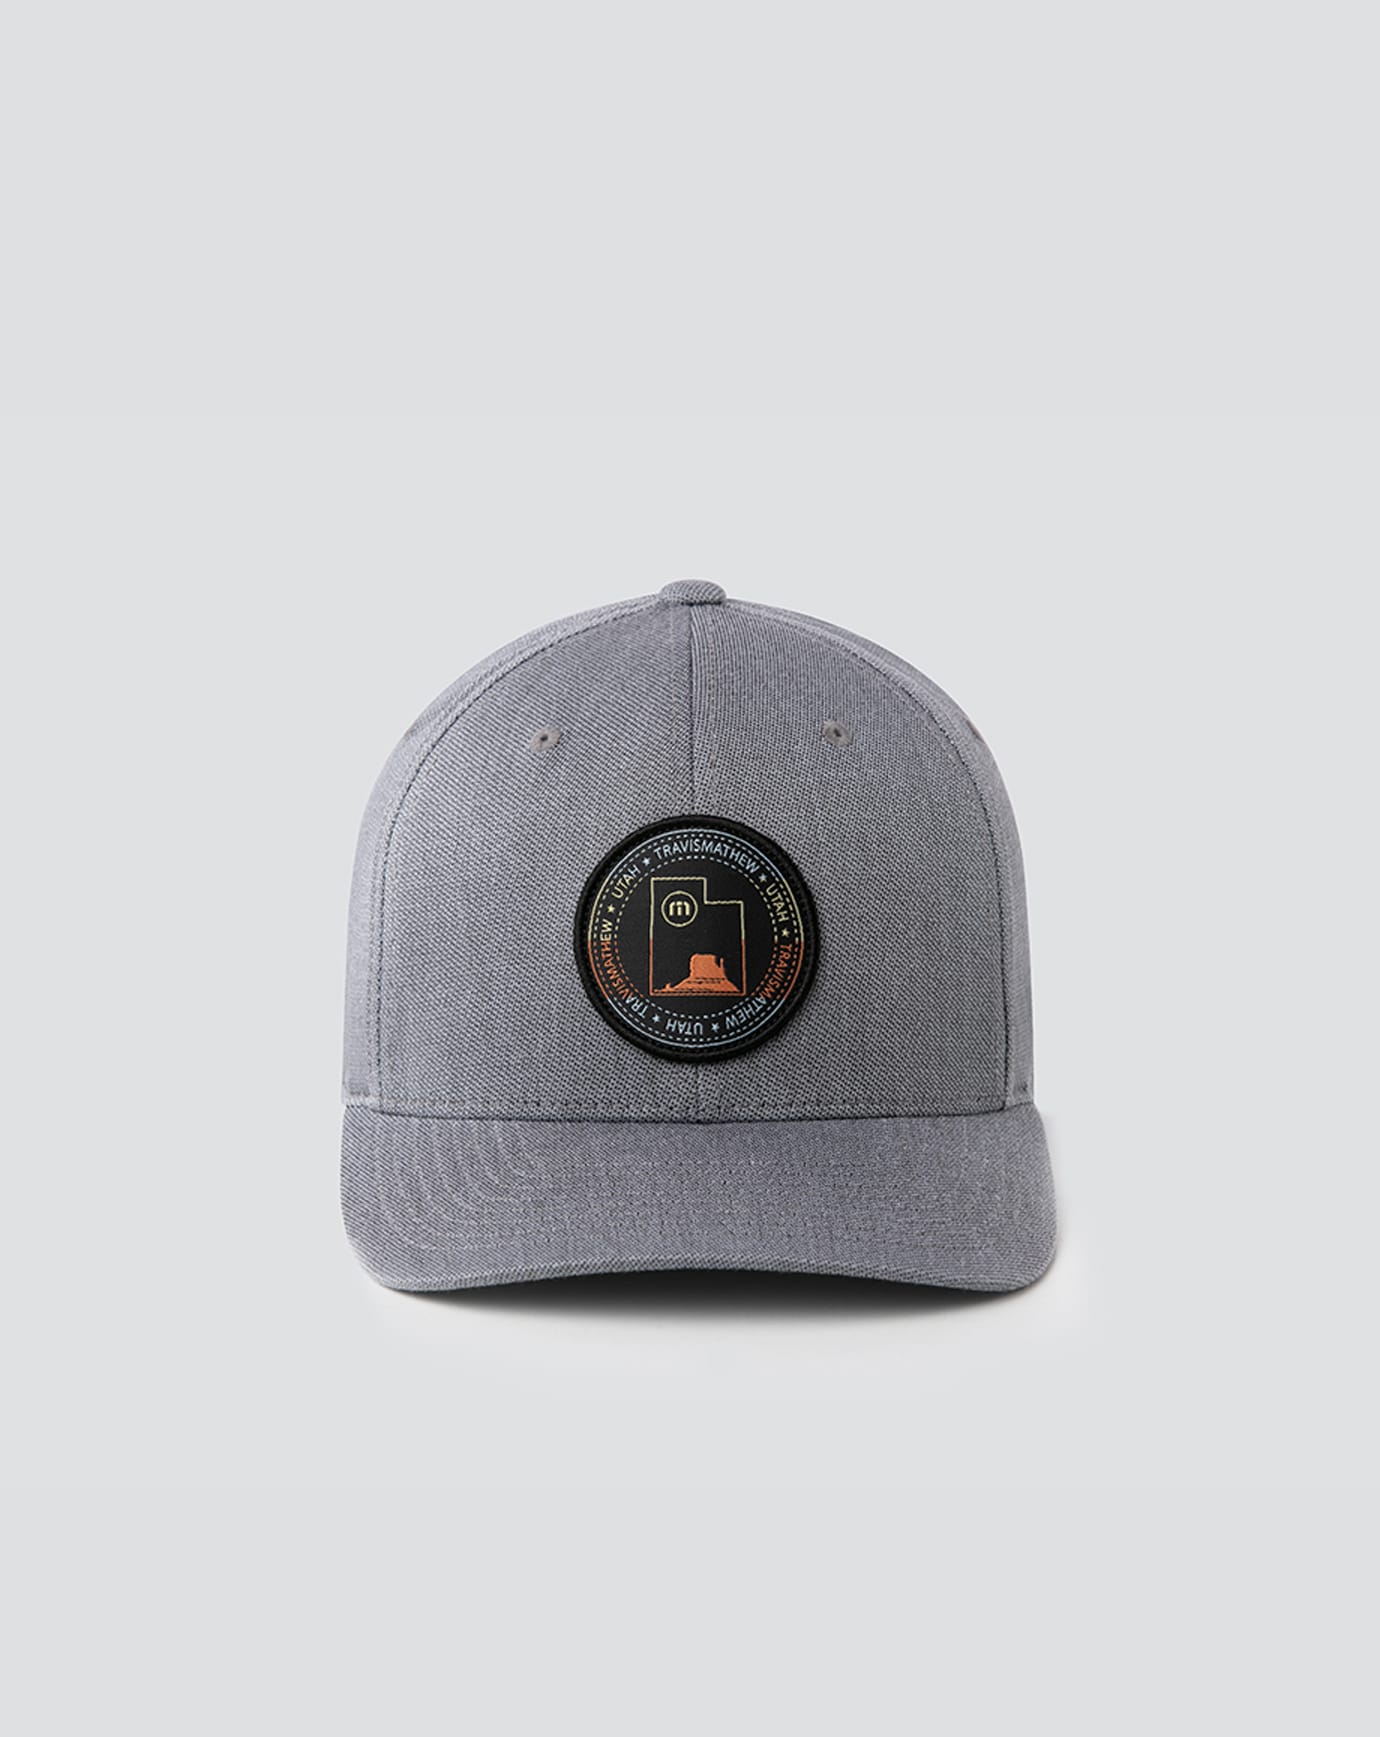 FOUR CORNERS FITTED HAT Image Thumbnail 1